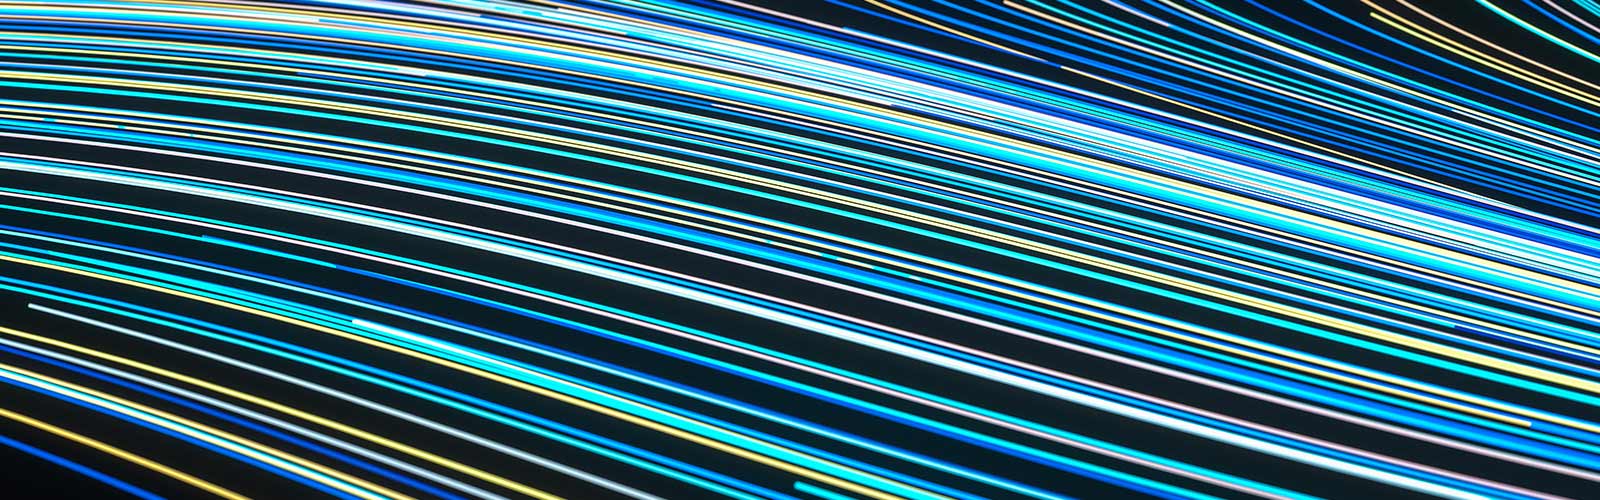 Blue lines moving in the same direction in an abstract representation of technology